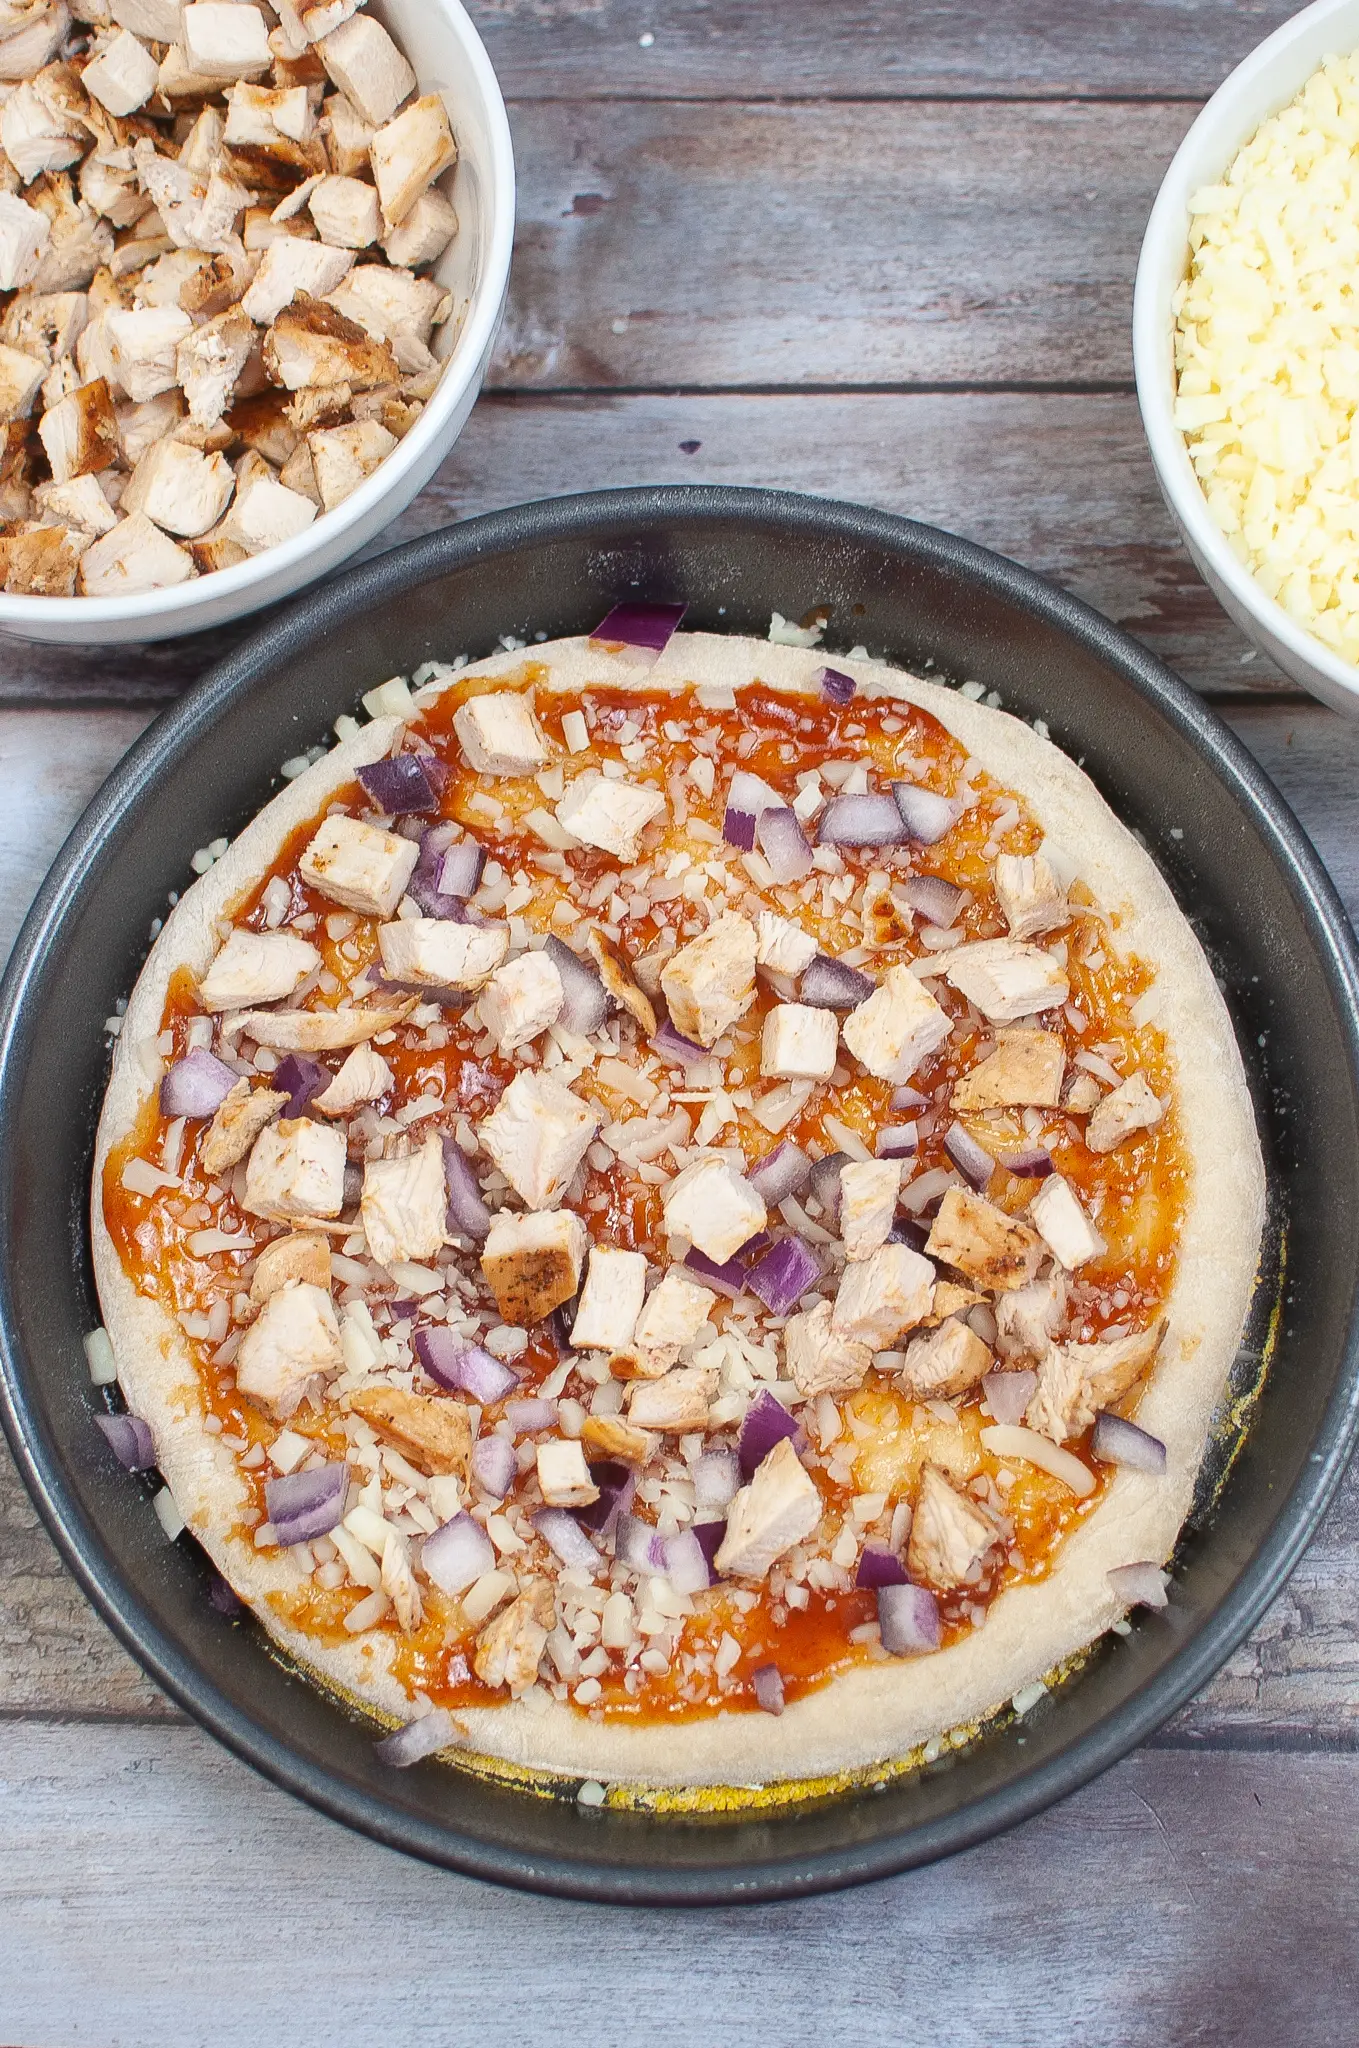 Pizza dough with bbq sauce, cheese, onion and chicken.